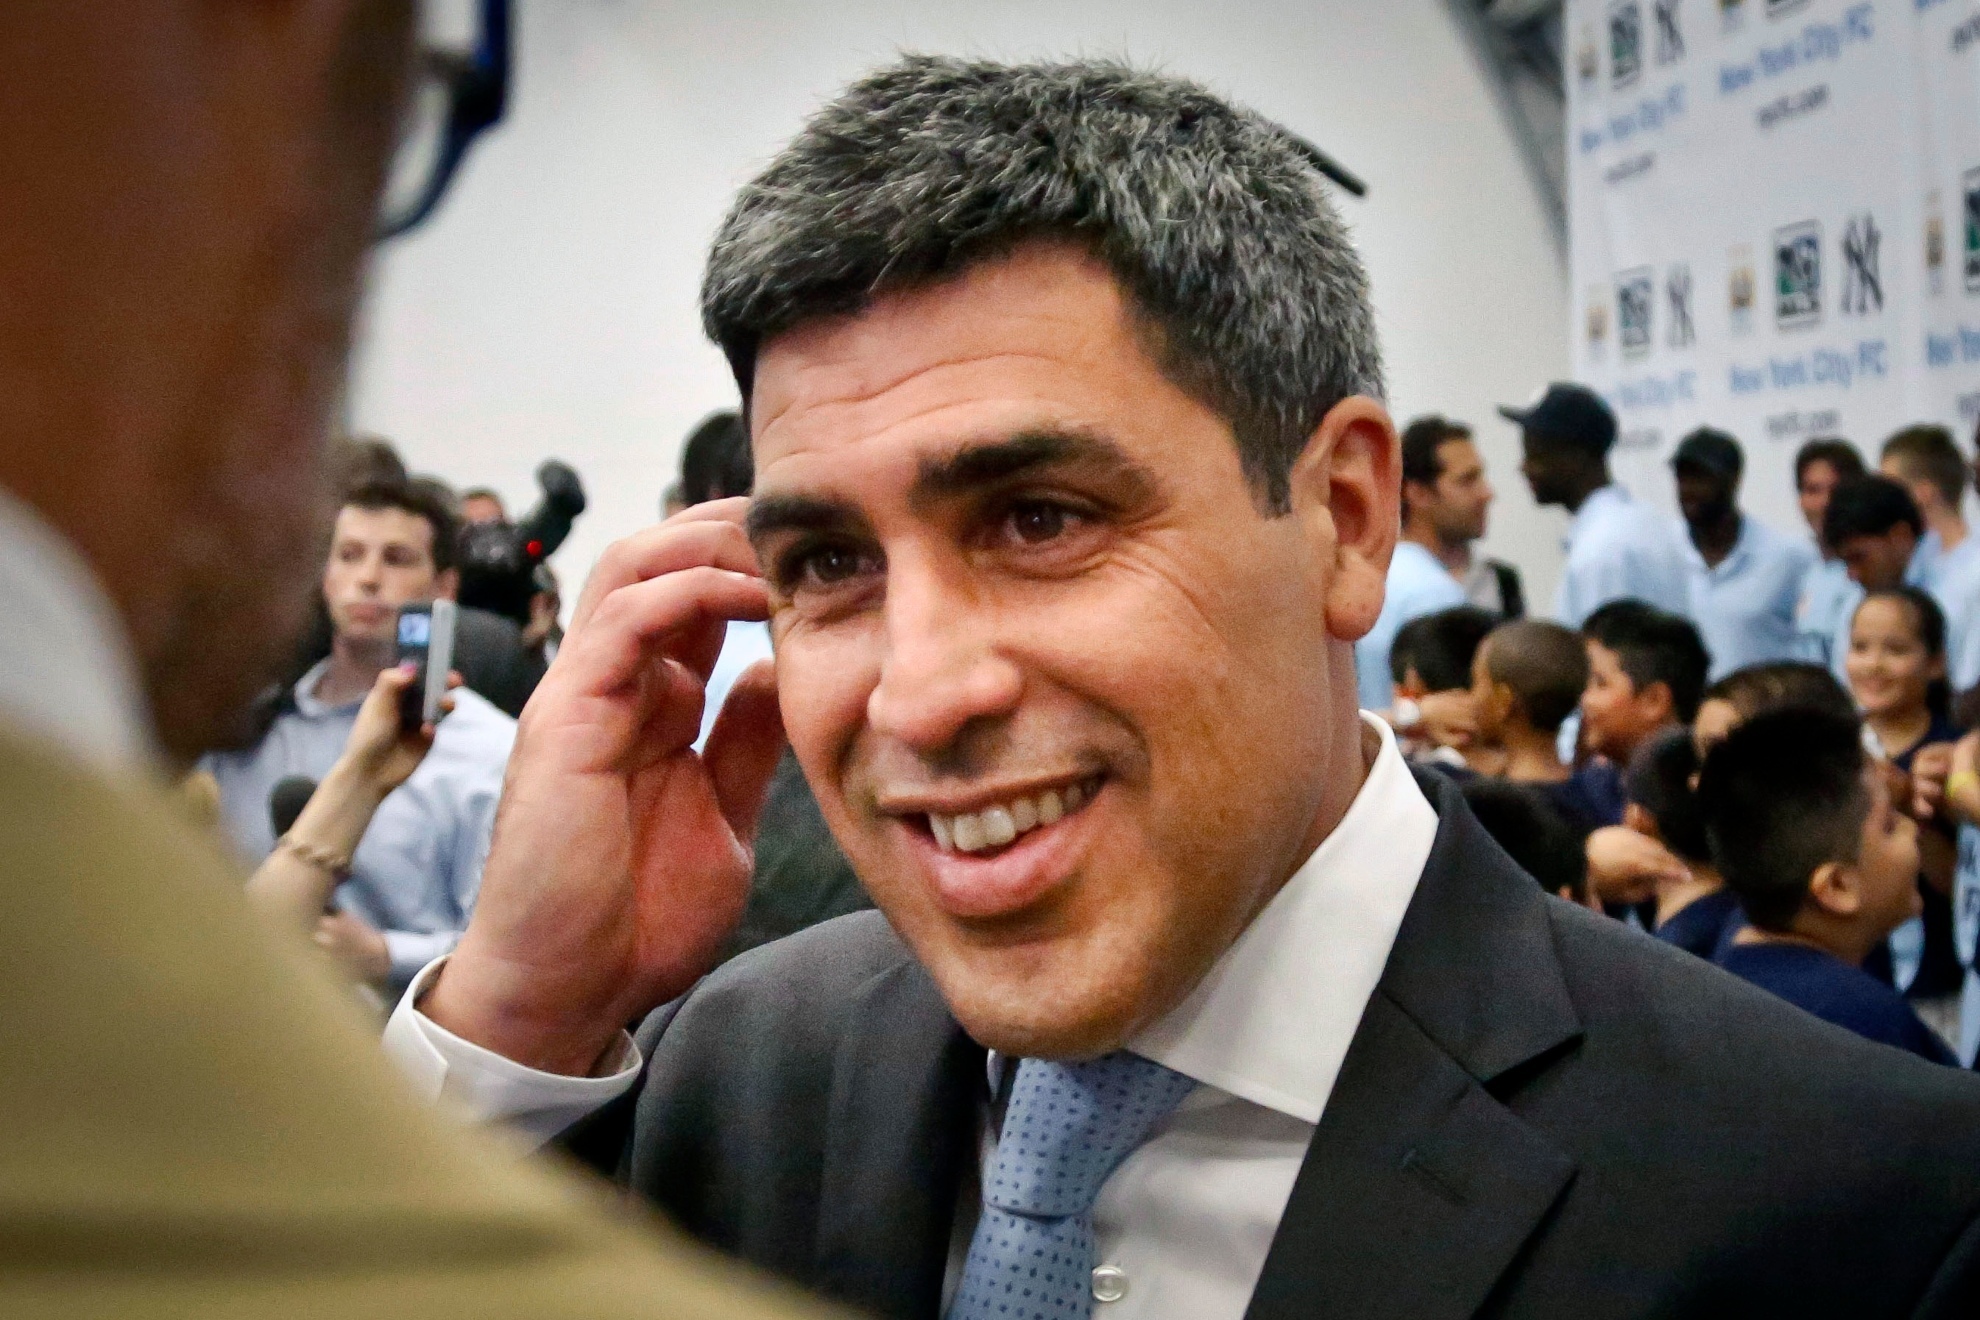 Claudio Reyna at a public event.